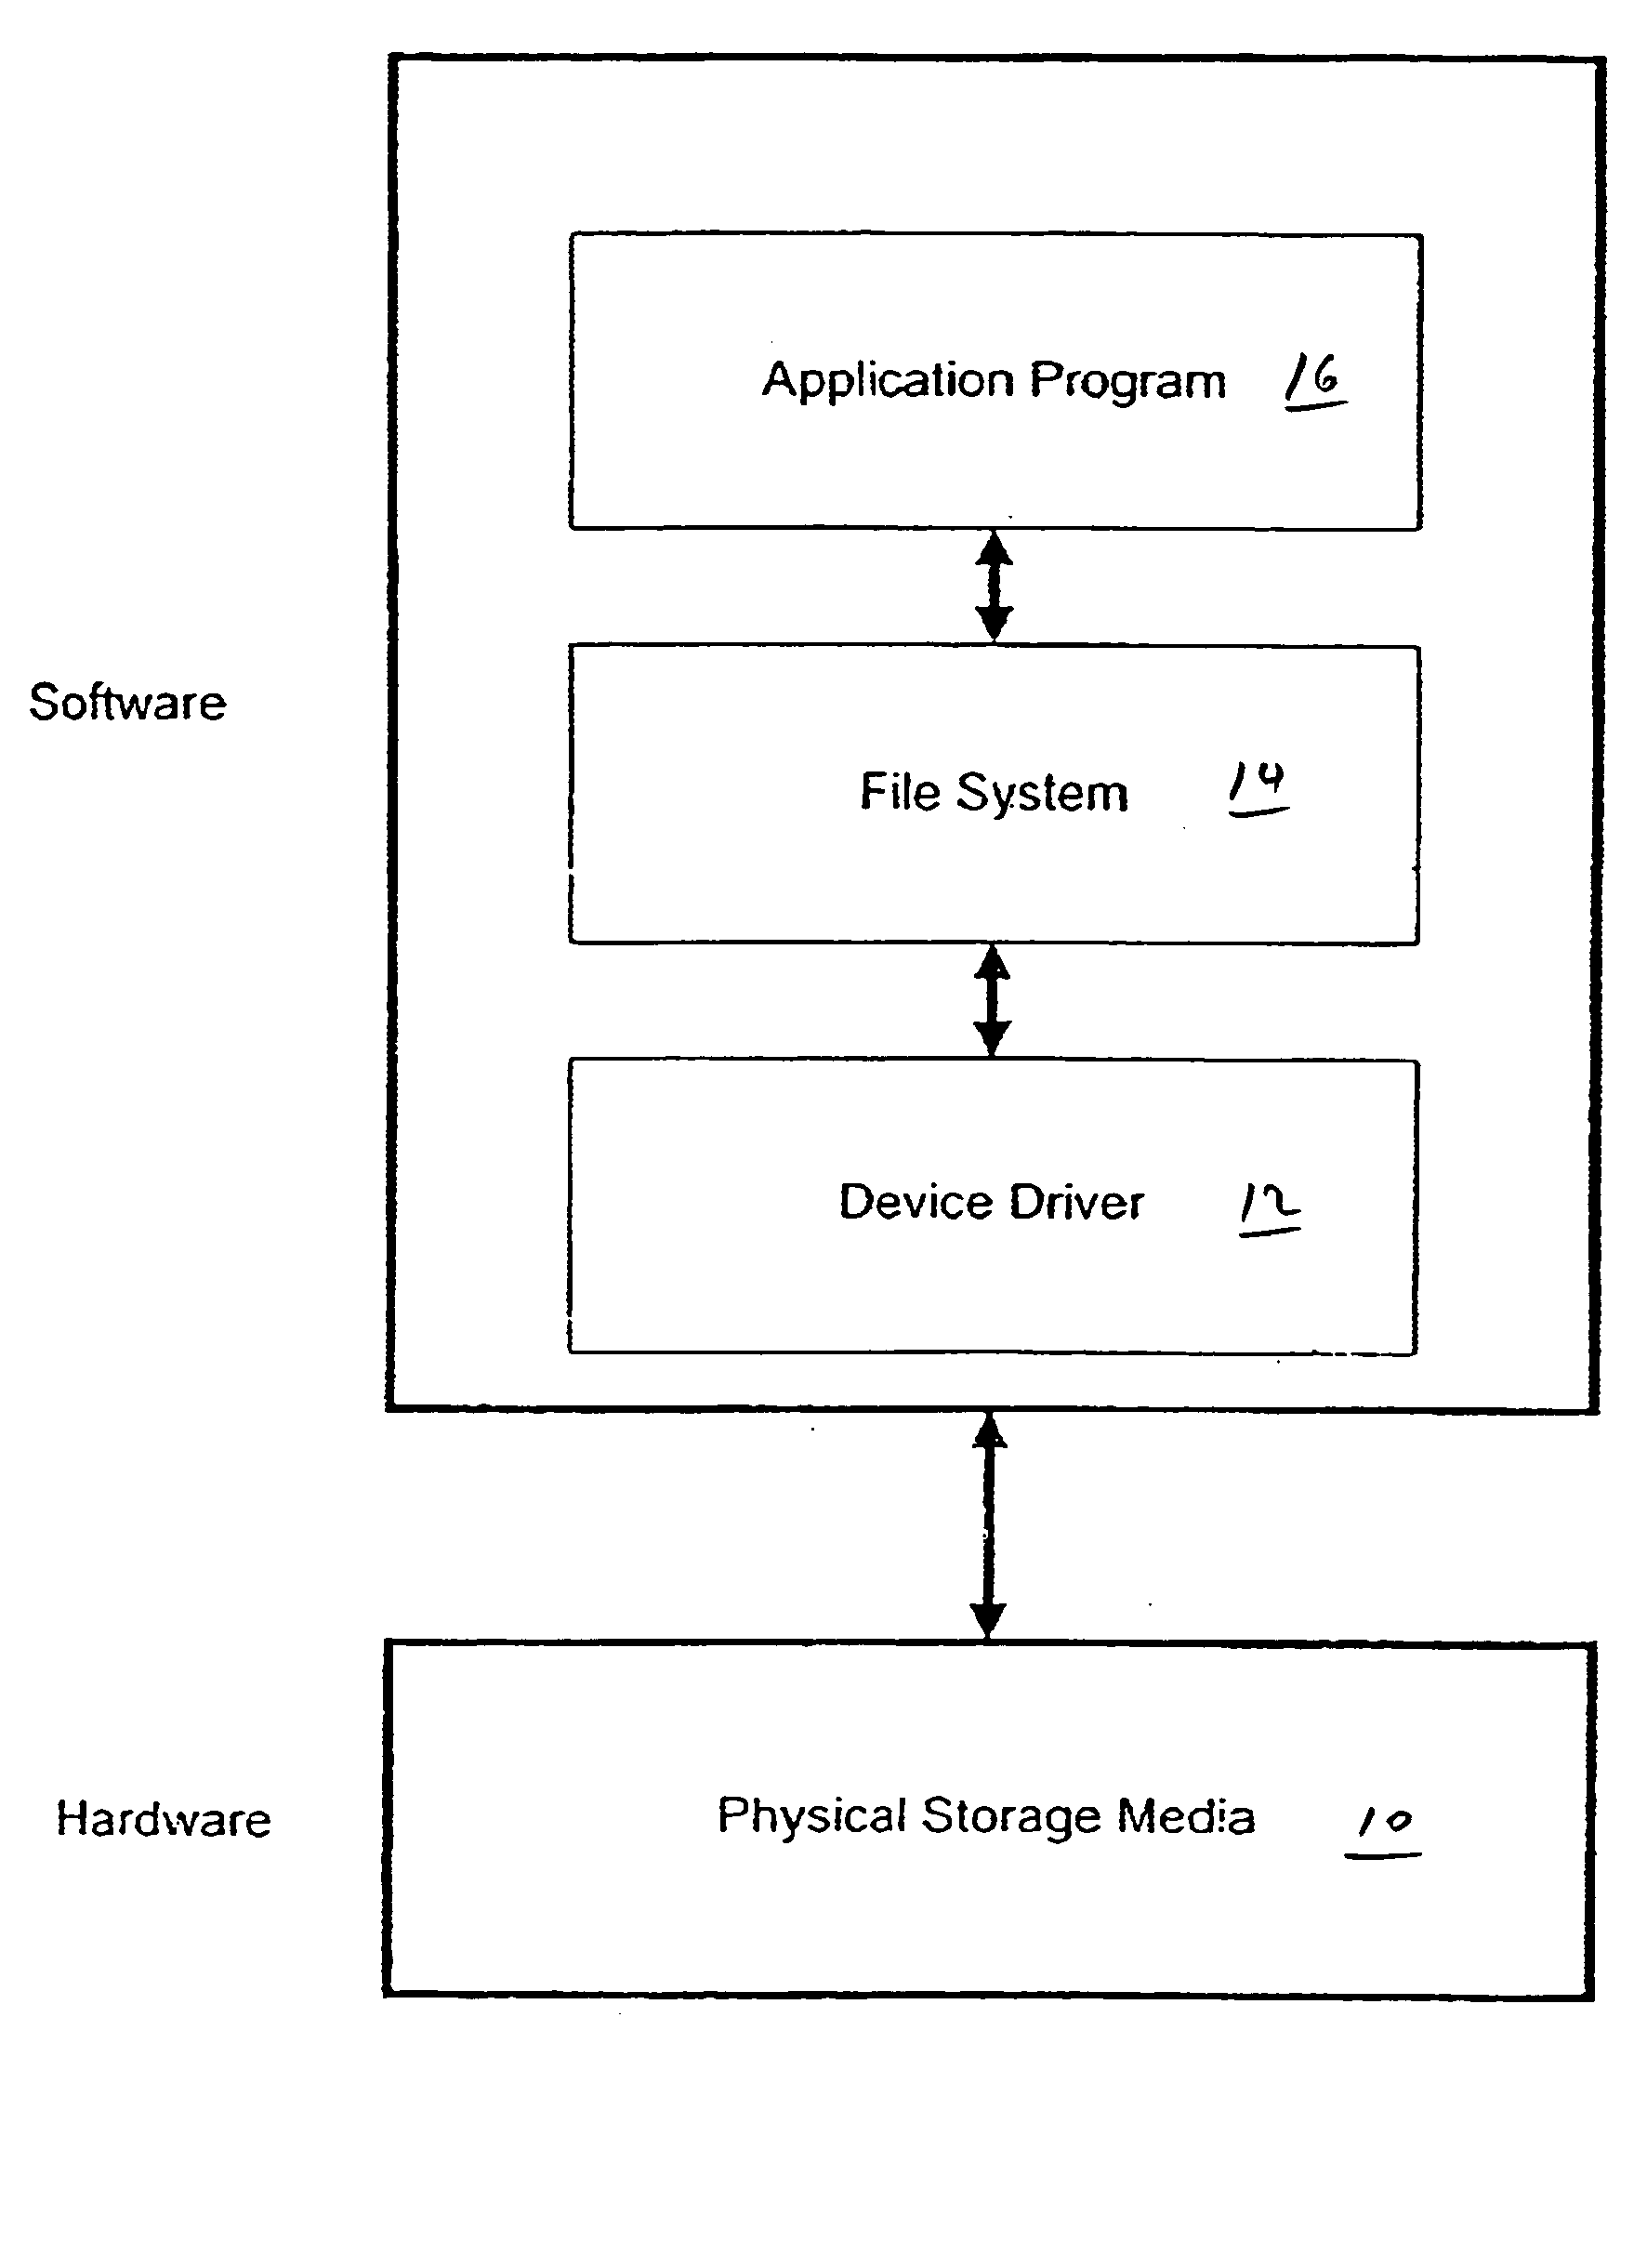 File system that manages files according to content